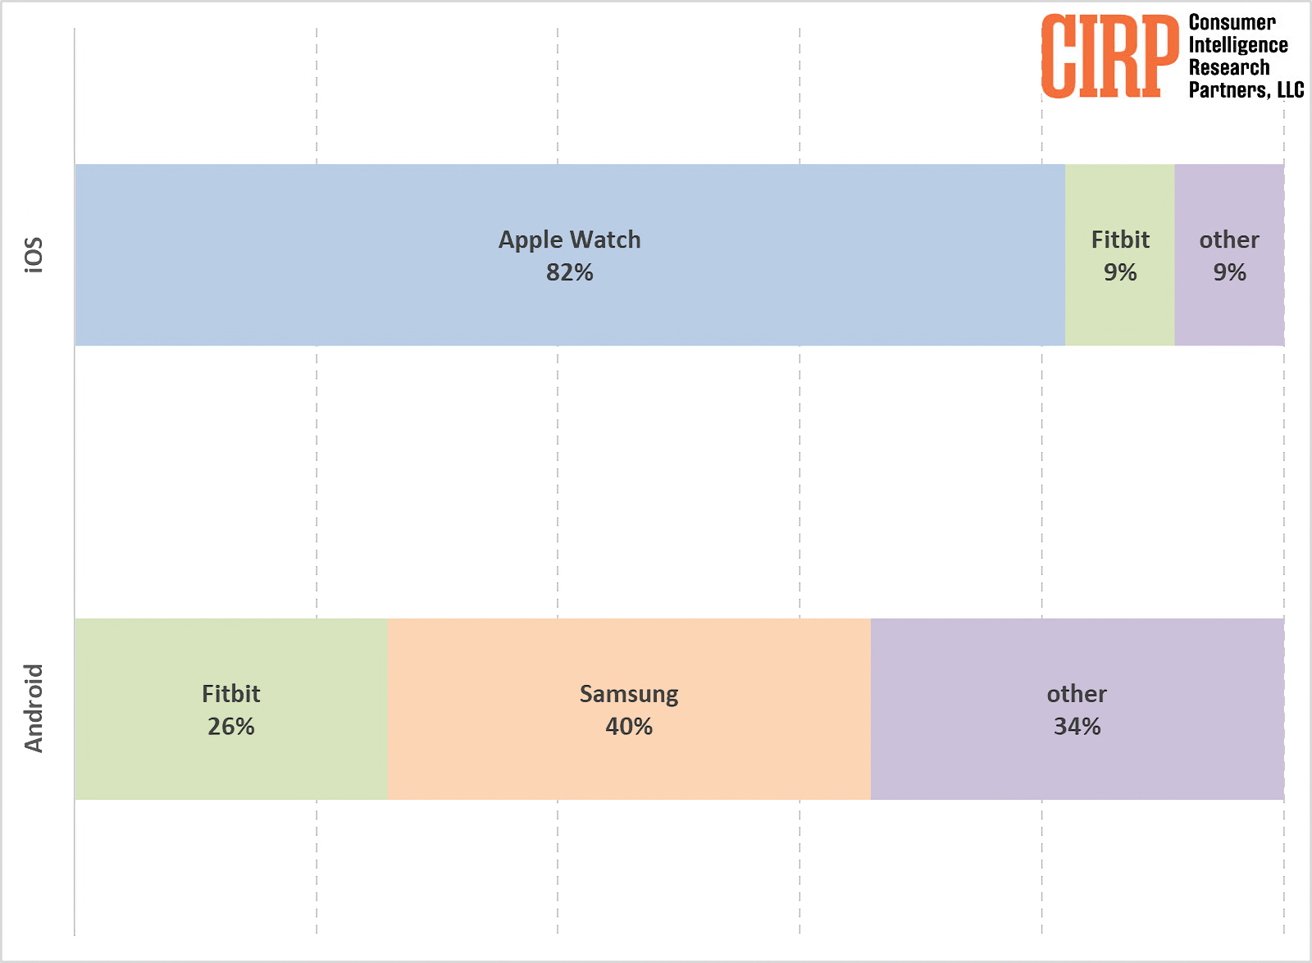 Horizontal bar graph showing market share of smartwatches on iOS and Android: Apple Watch at 82%, Samsung at 40%, Fitbit at 26% and 9% on iOS, and other brands at 34% and 9%.